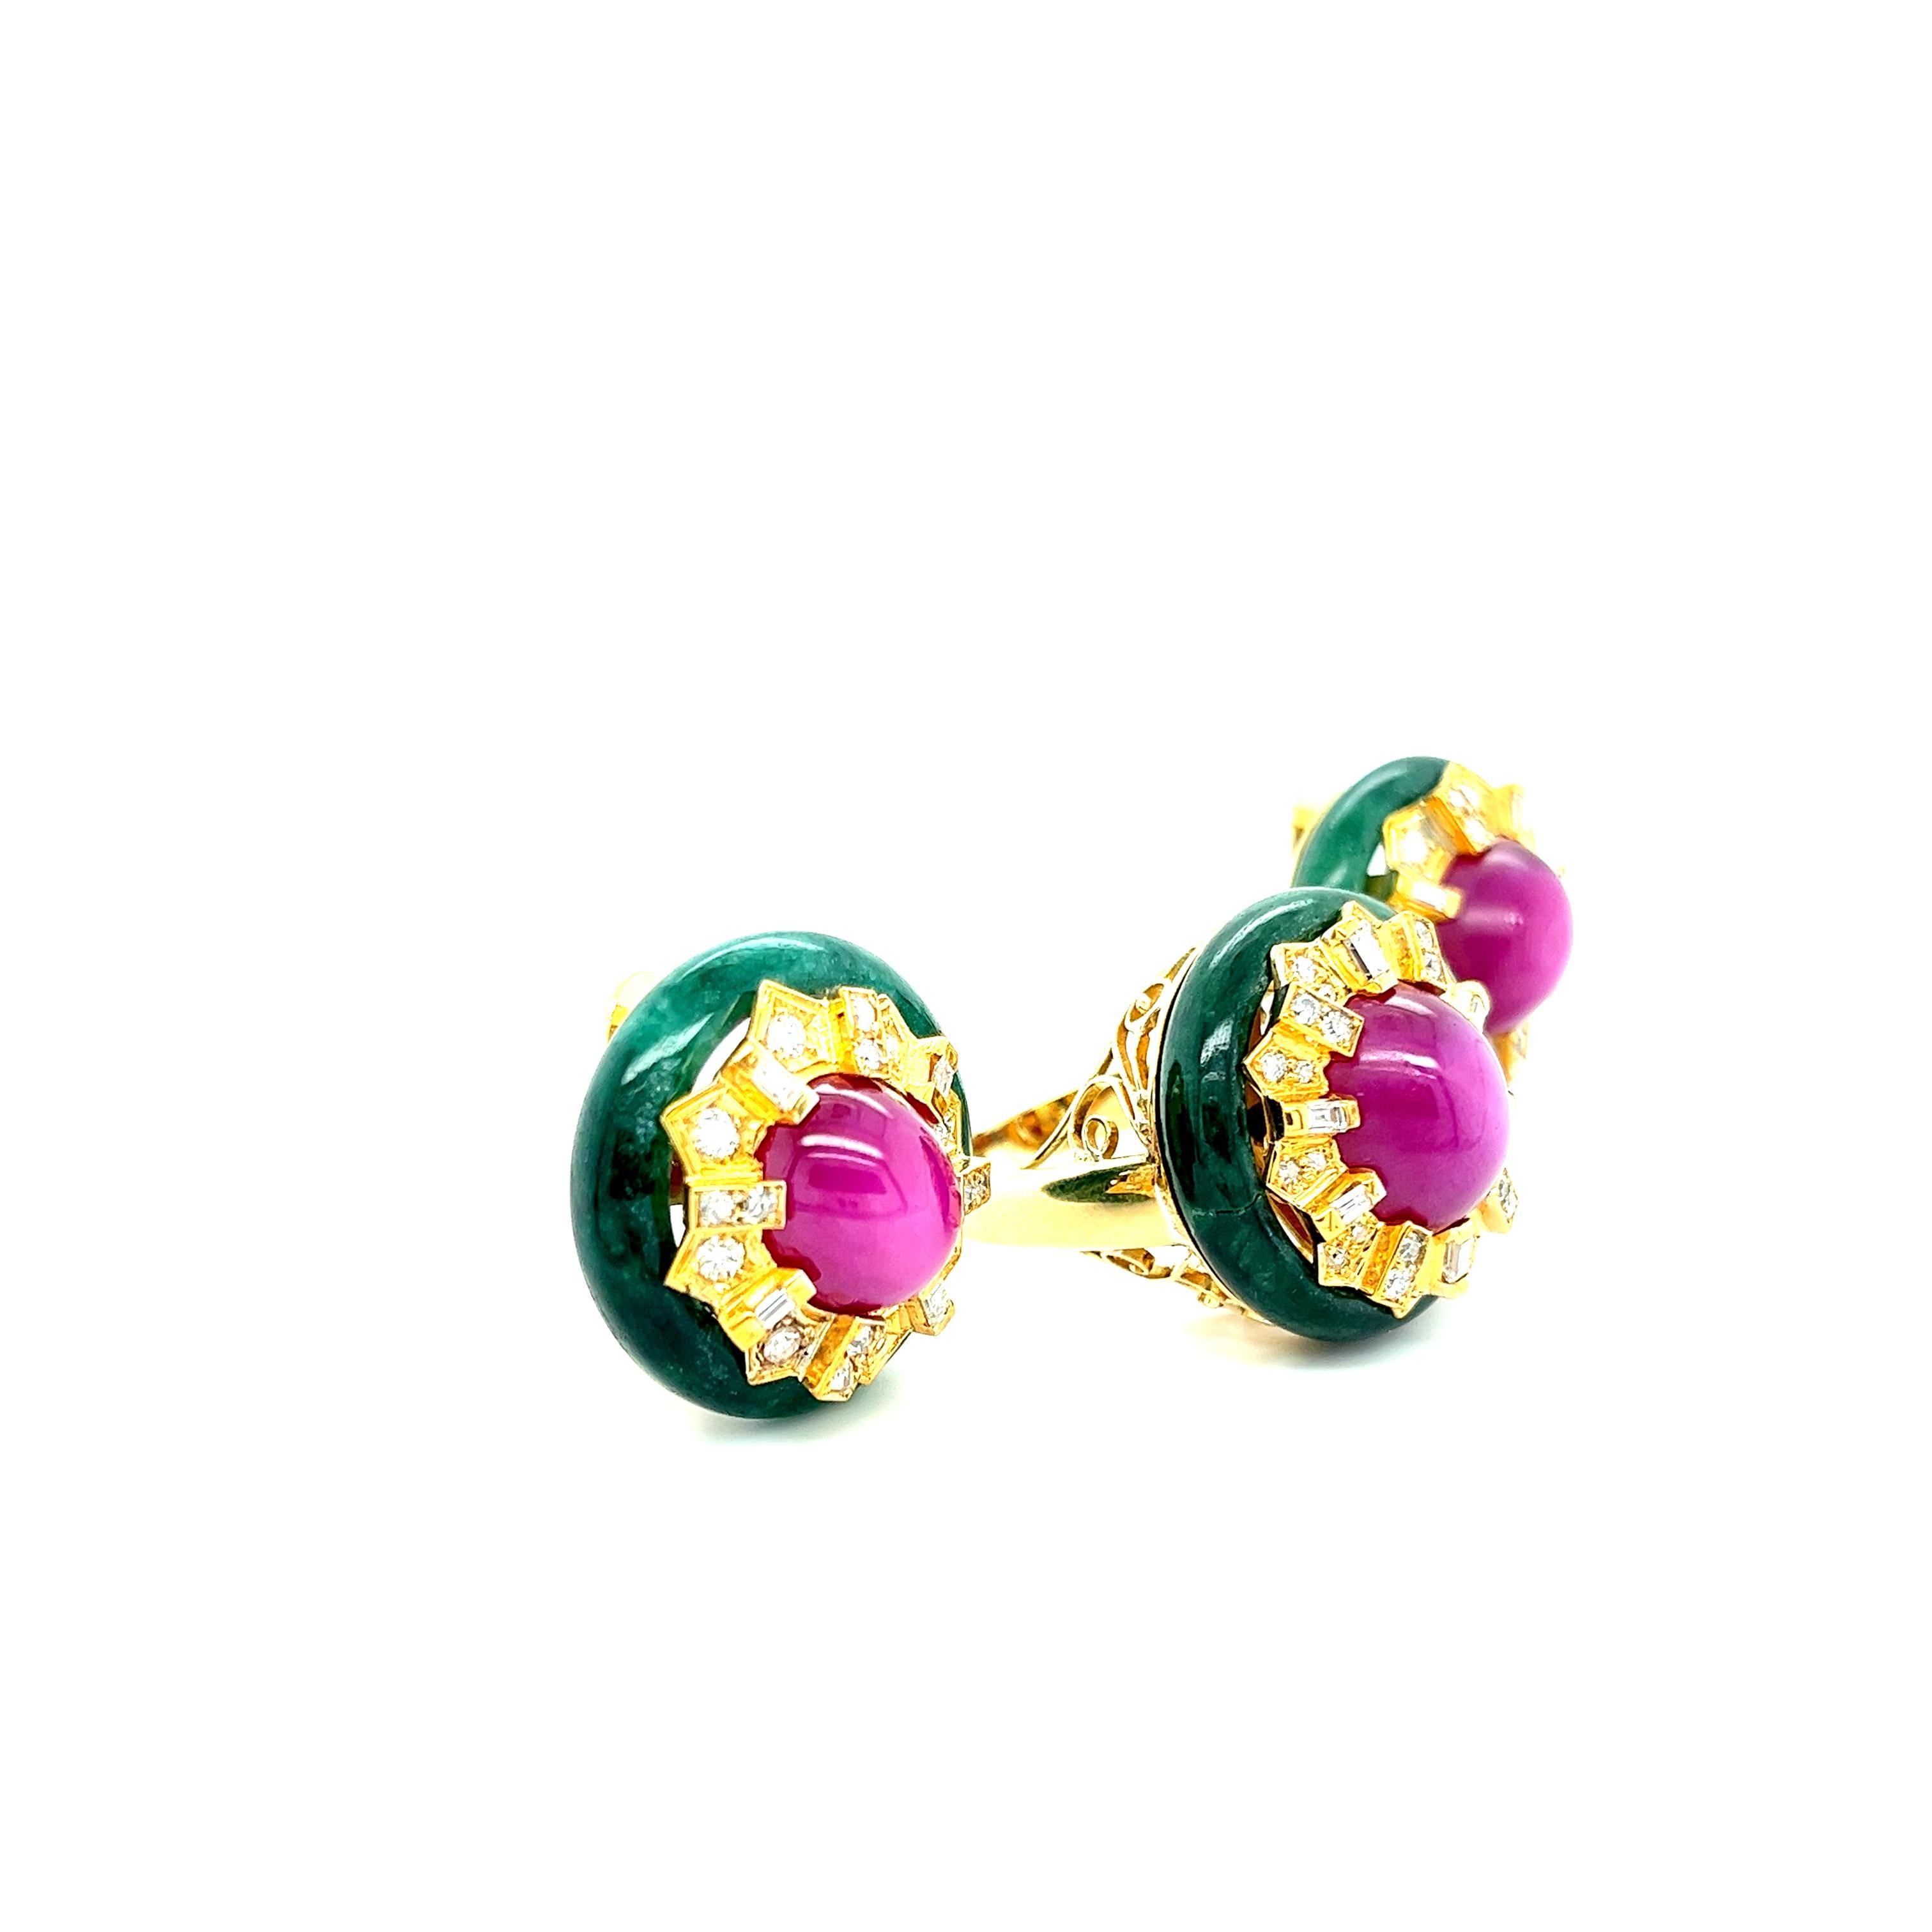 Cabochon-Cut Ruby Jade and Diamond 18K Gold Ring and Earrings Set For Sale 4